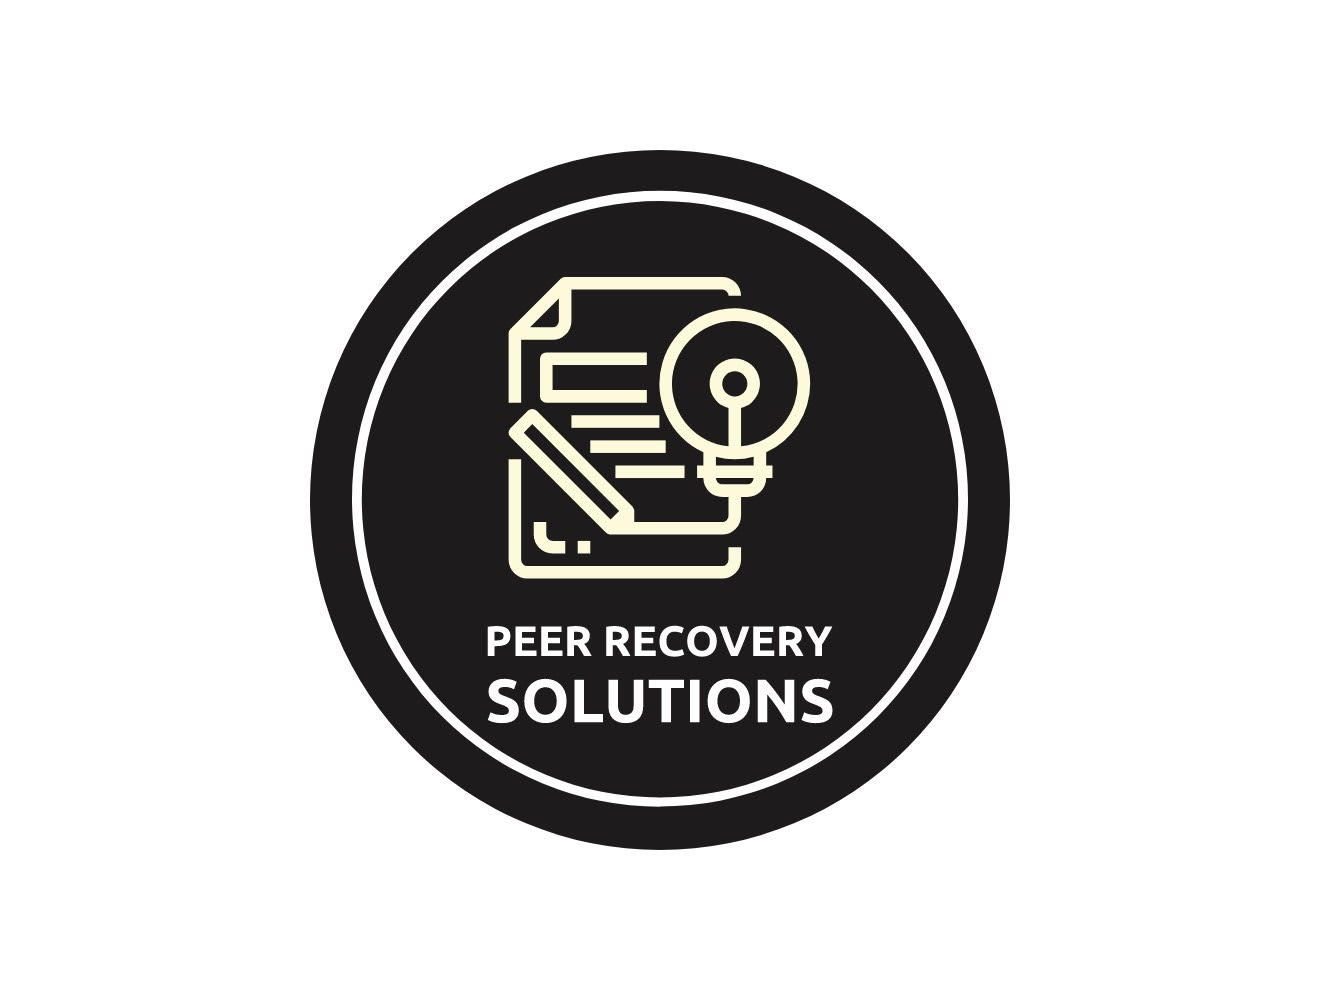 PEER RECOVERY SOLUTIONS LOGO